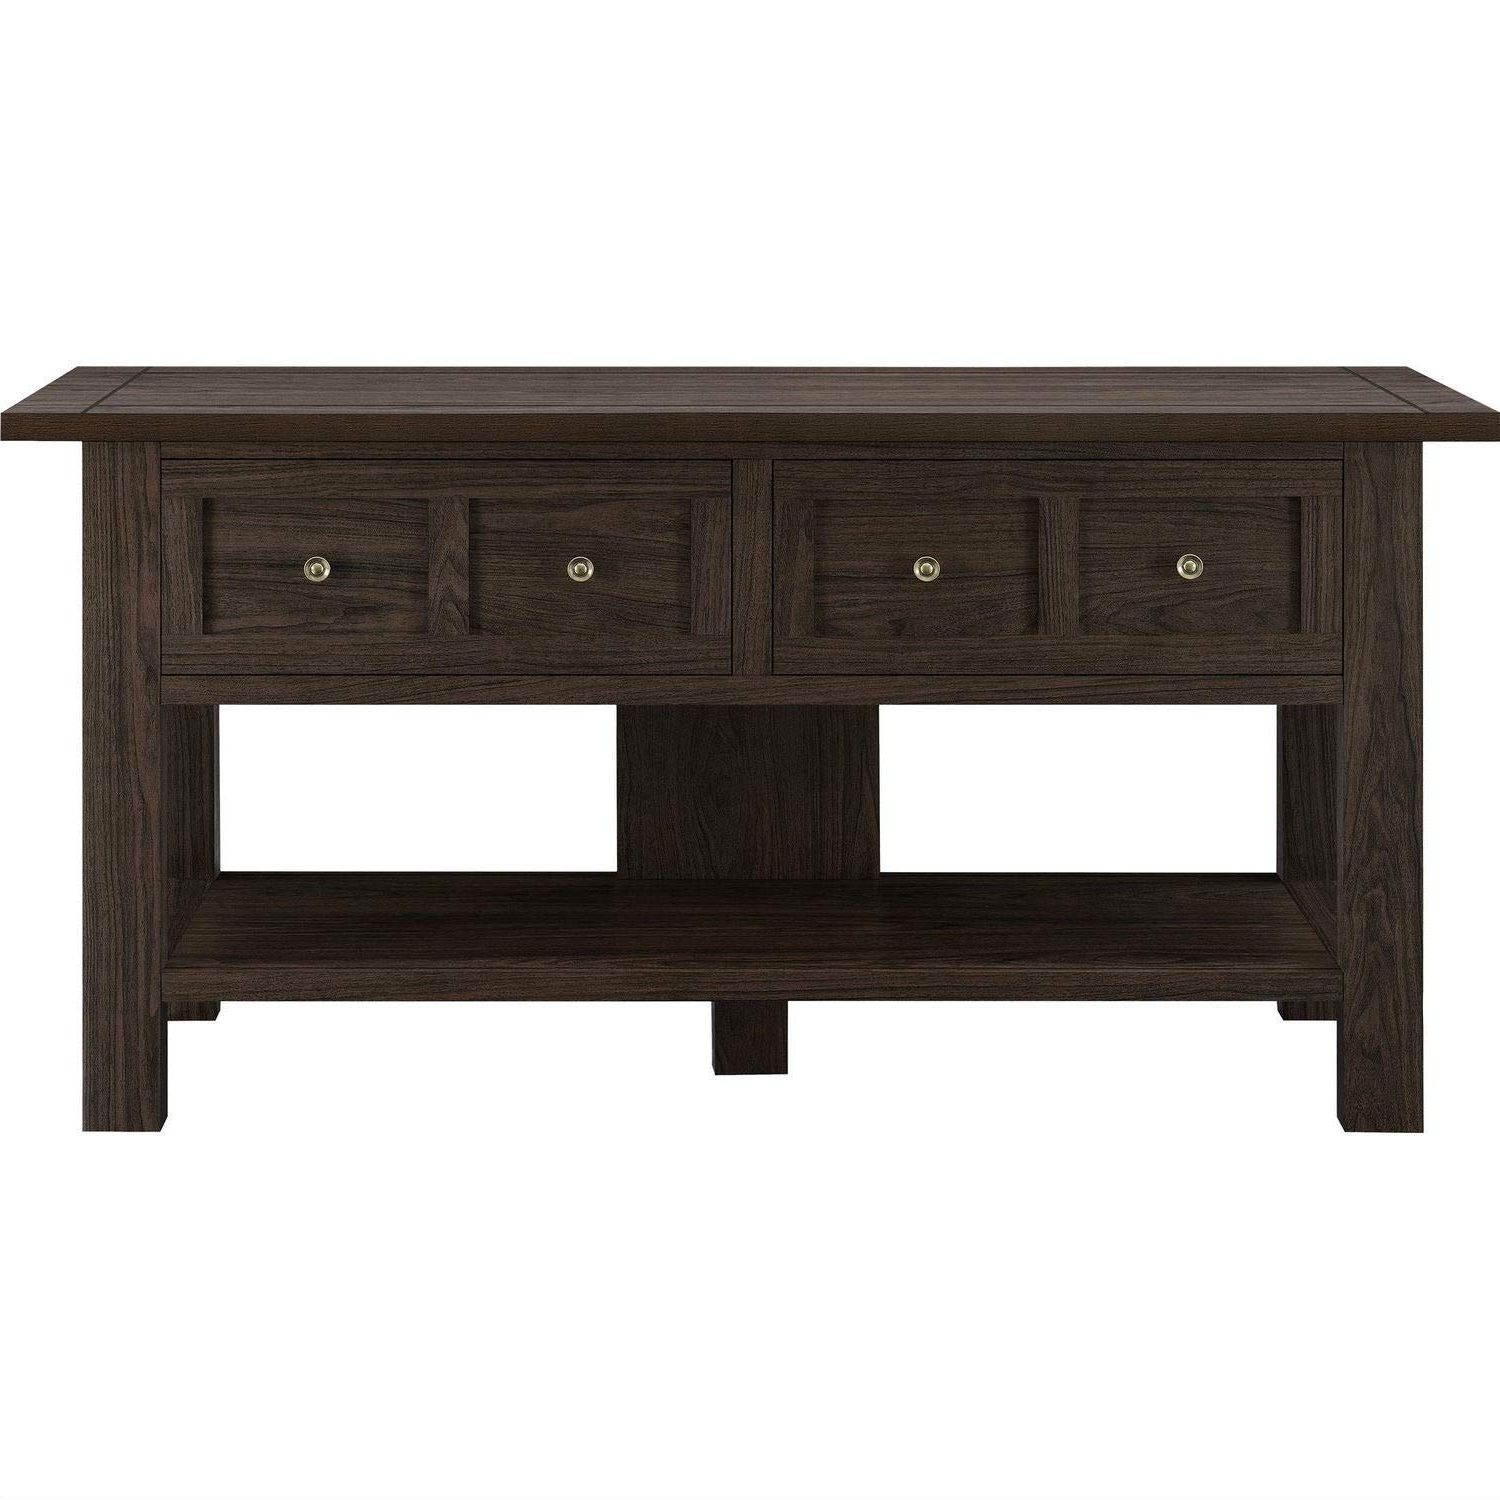 Natural 2 Door Plasma Console Tables In Fashionable Cheap Tv Console Storage, Find Tv Console Storage Deals On Line At (View 12 of 20)